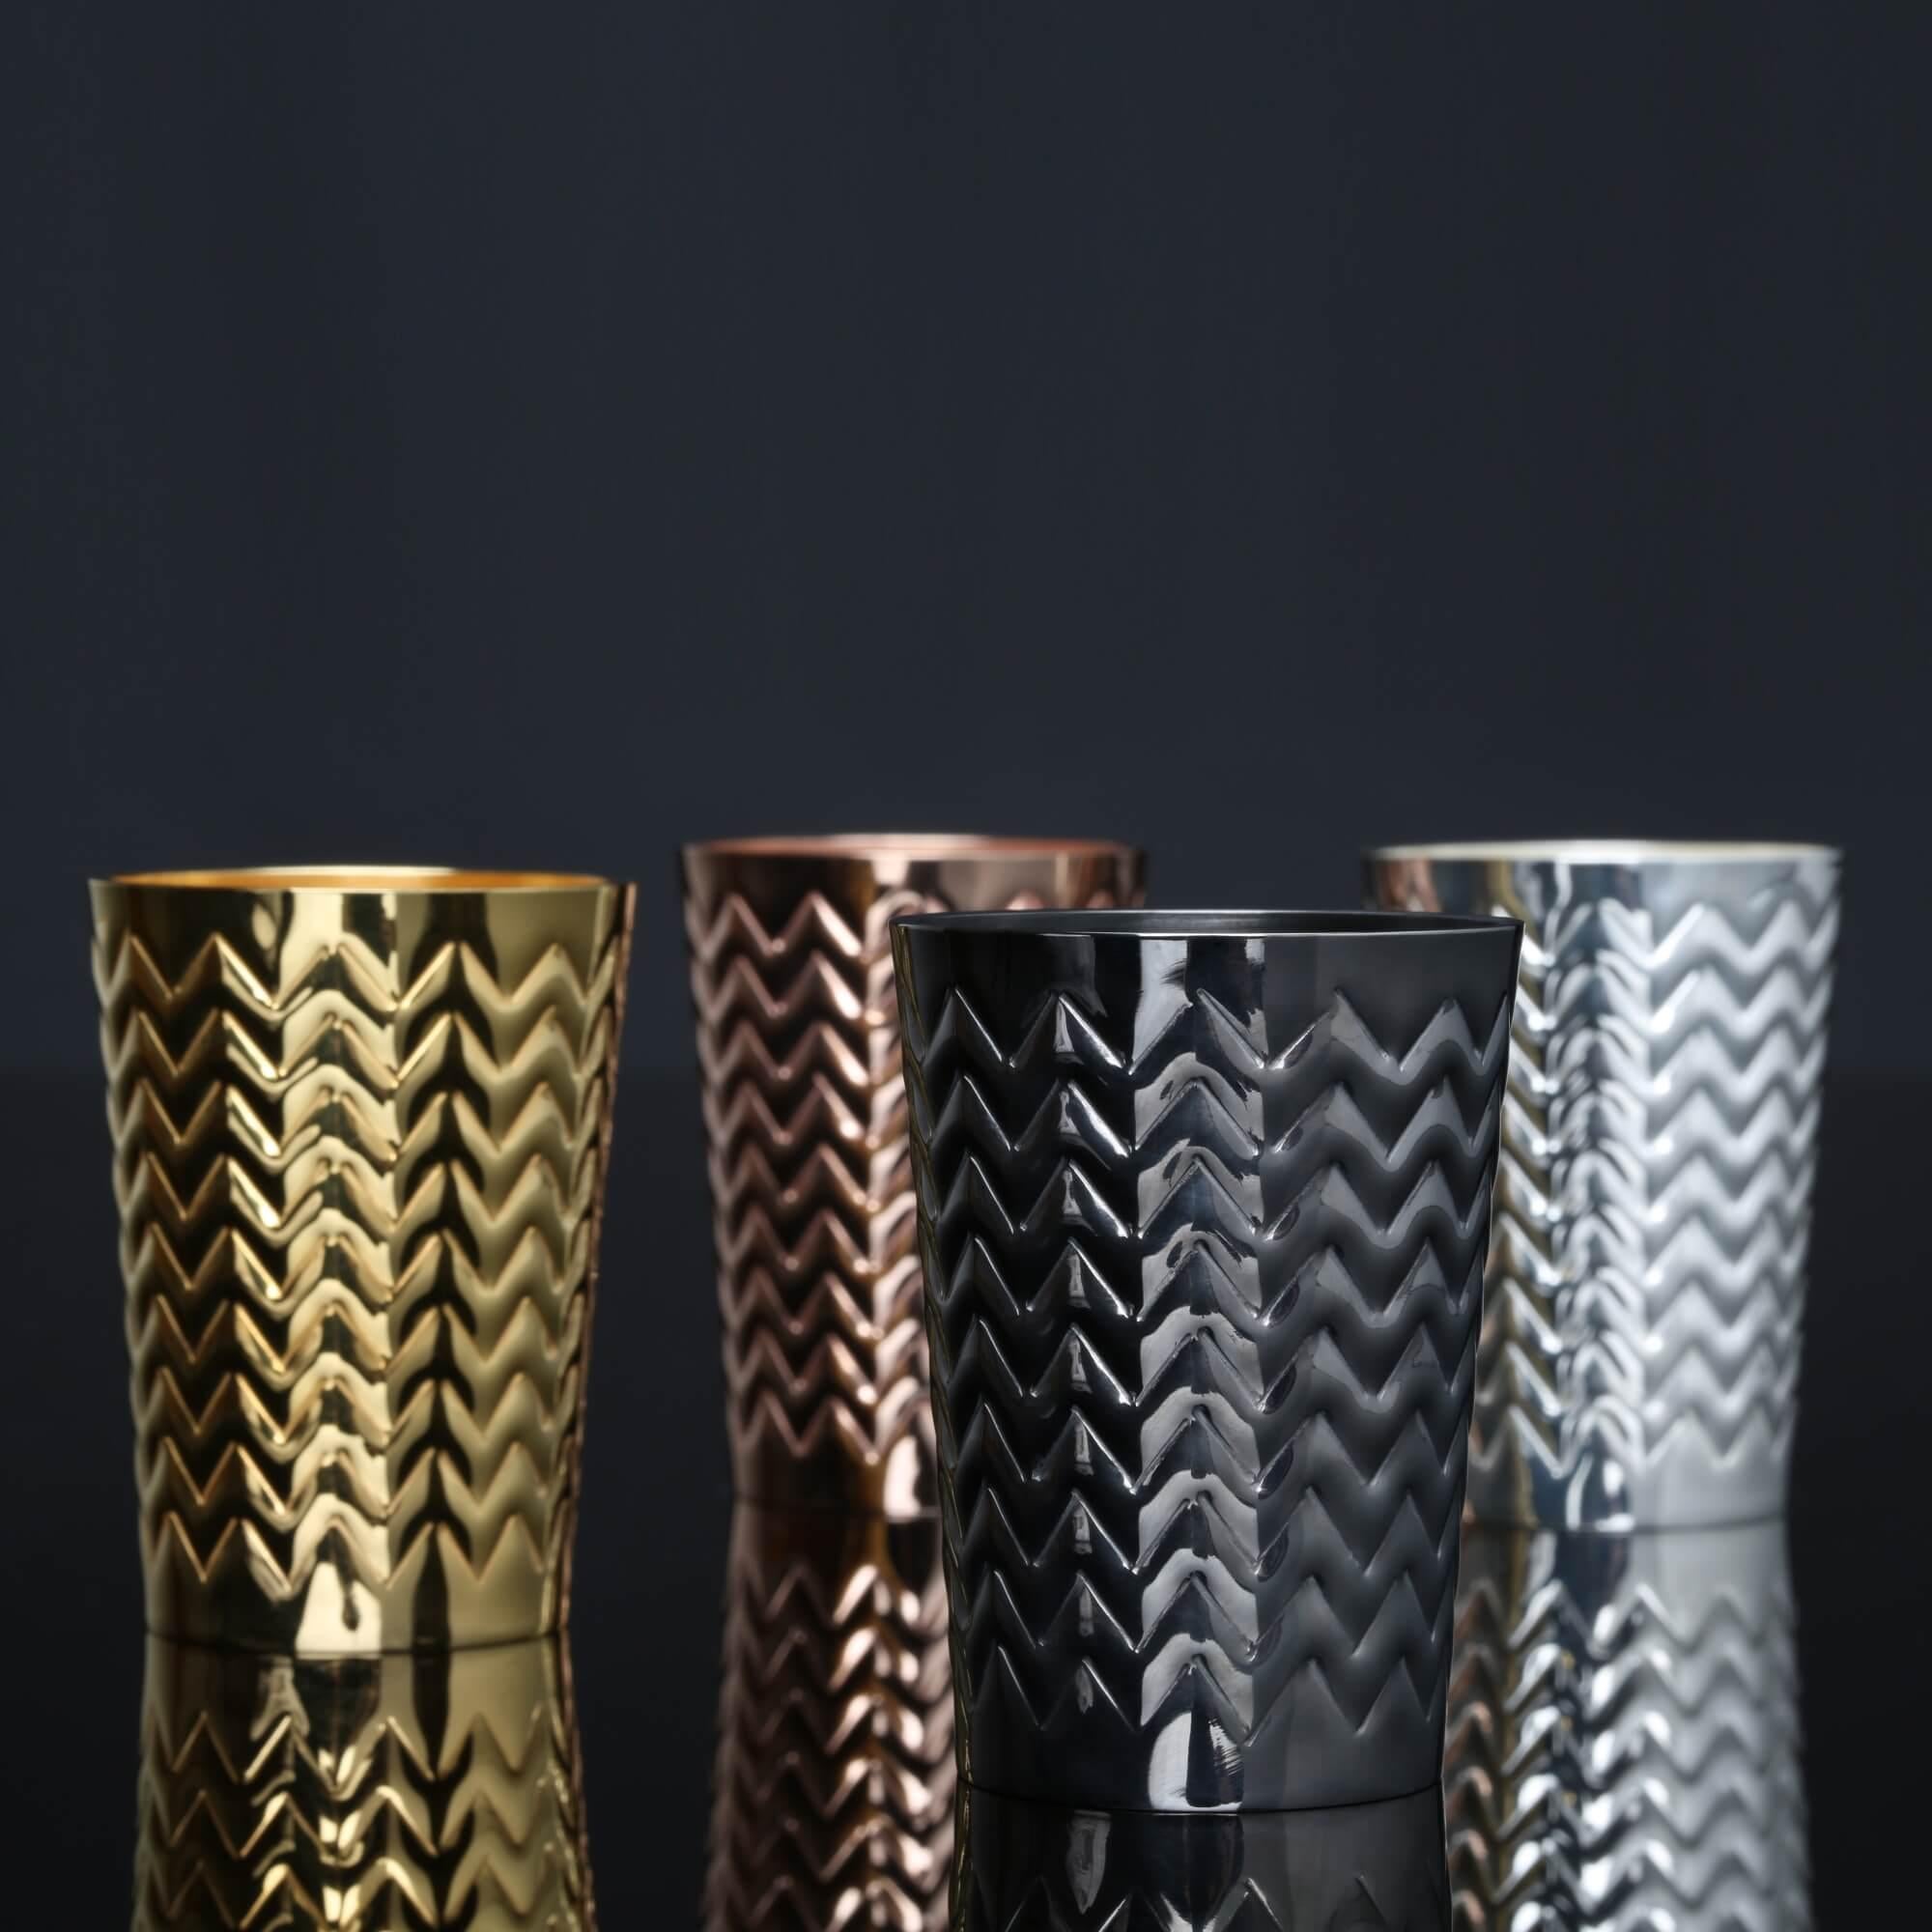 Crafted from sterling silver with yellow gold, rose gold and rhodium gilding, Rebecca de Quin’s four seasons shot cups are a magnificent display of her gifted craftsmanship and quality materials. Highlighting the value and uniqueness of silver, her